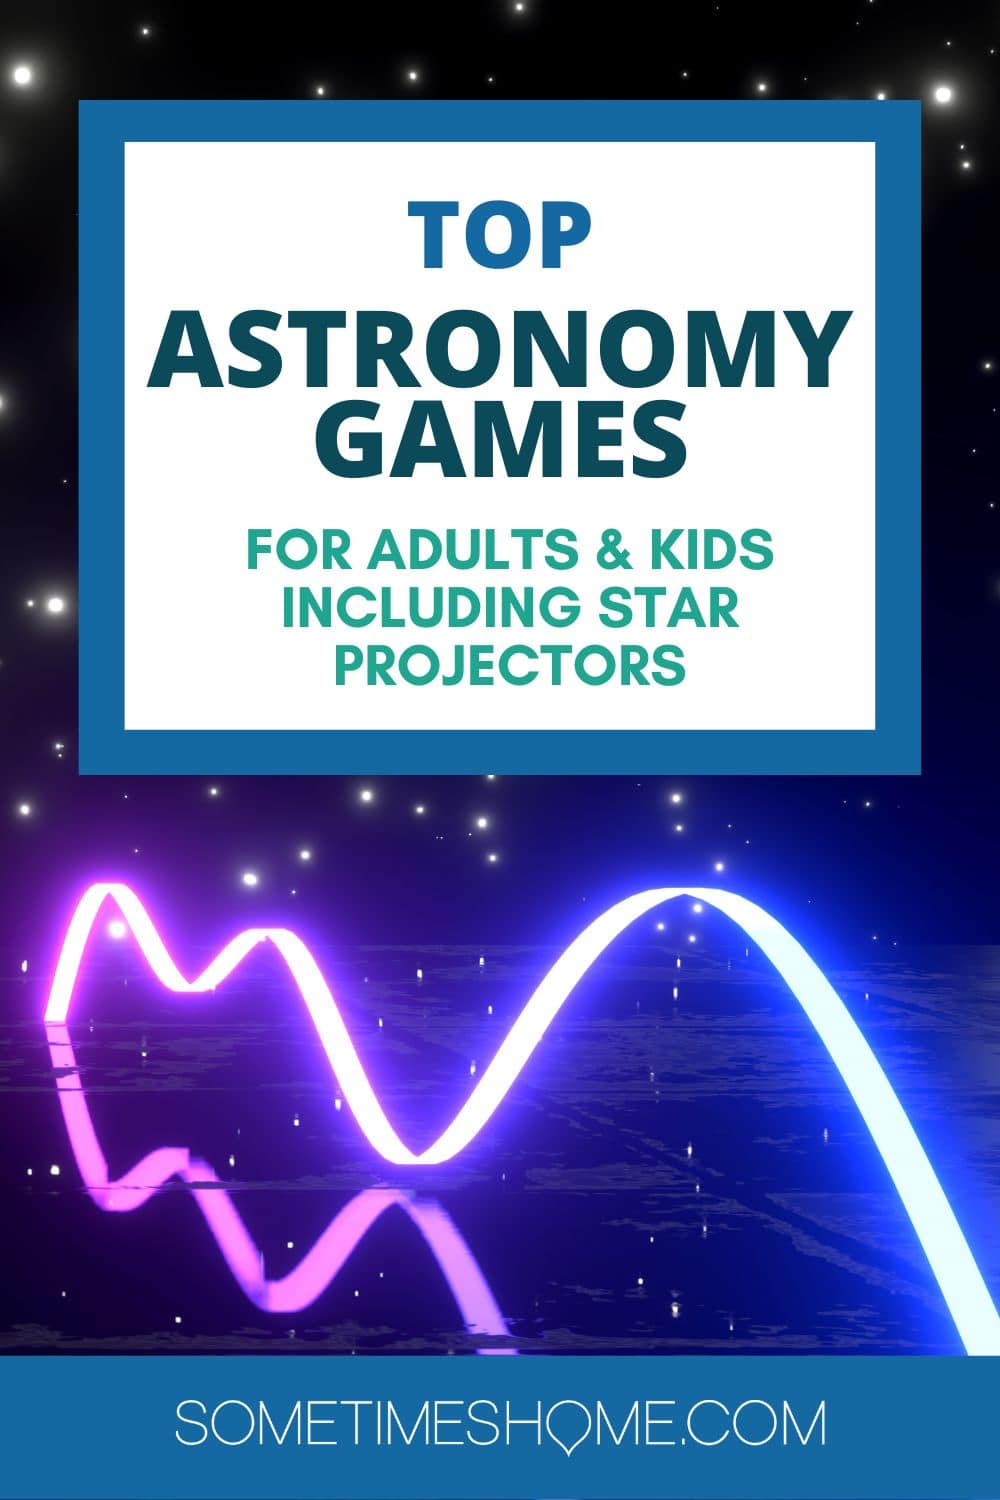 Top astronomy games for adults and kids, including star projectors, with a neon and star photo behind it.